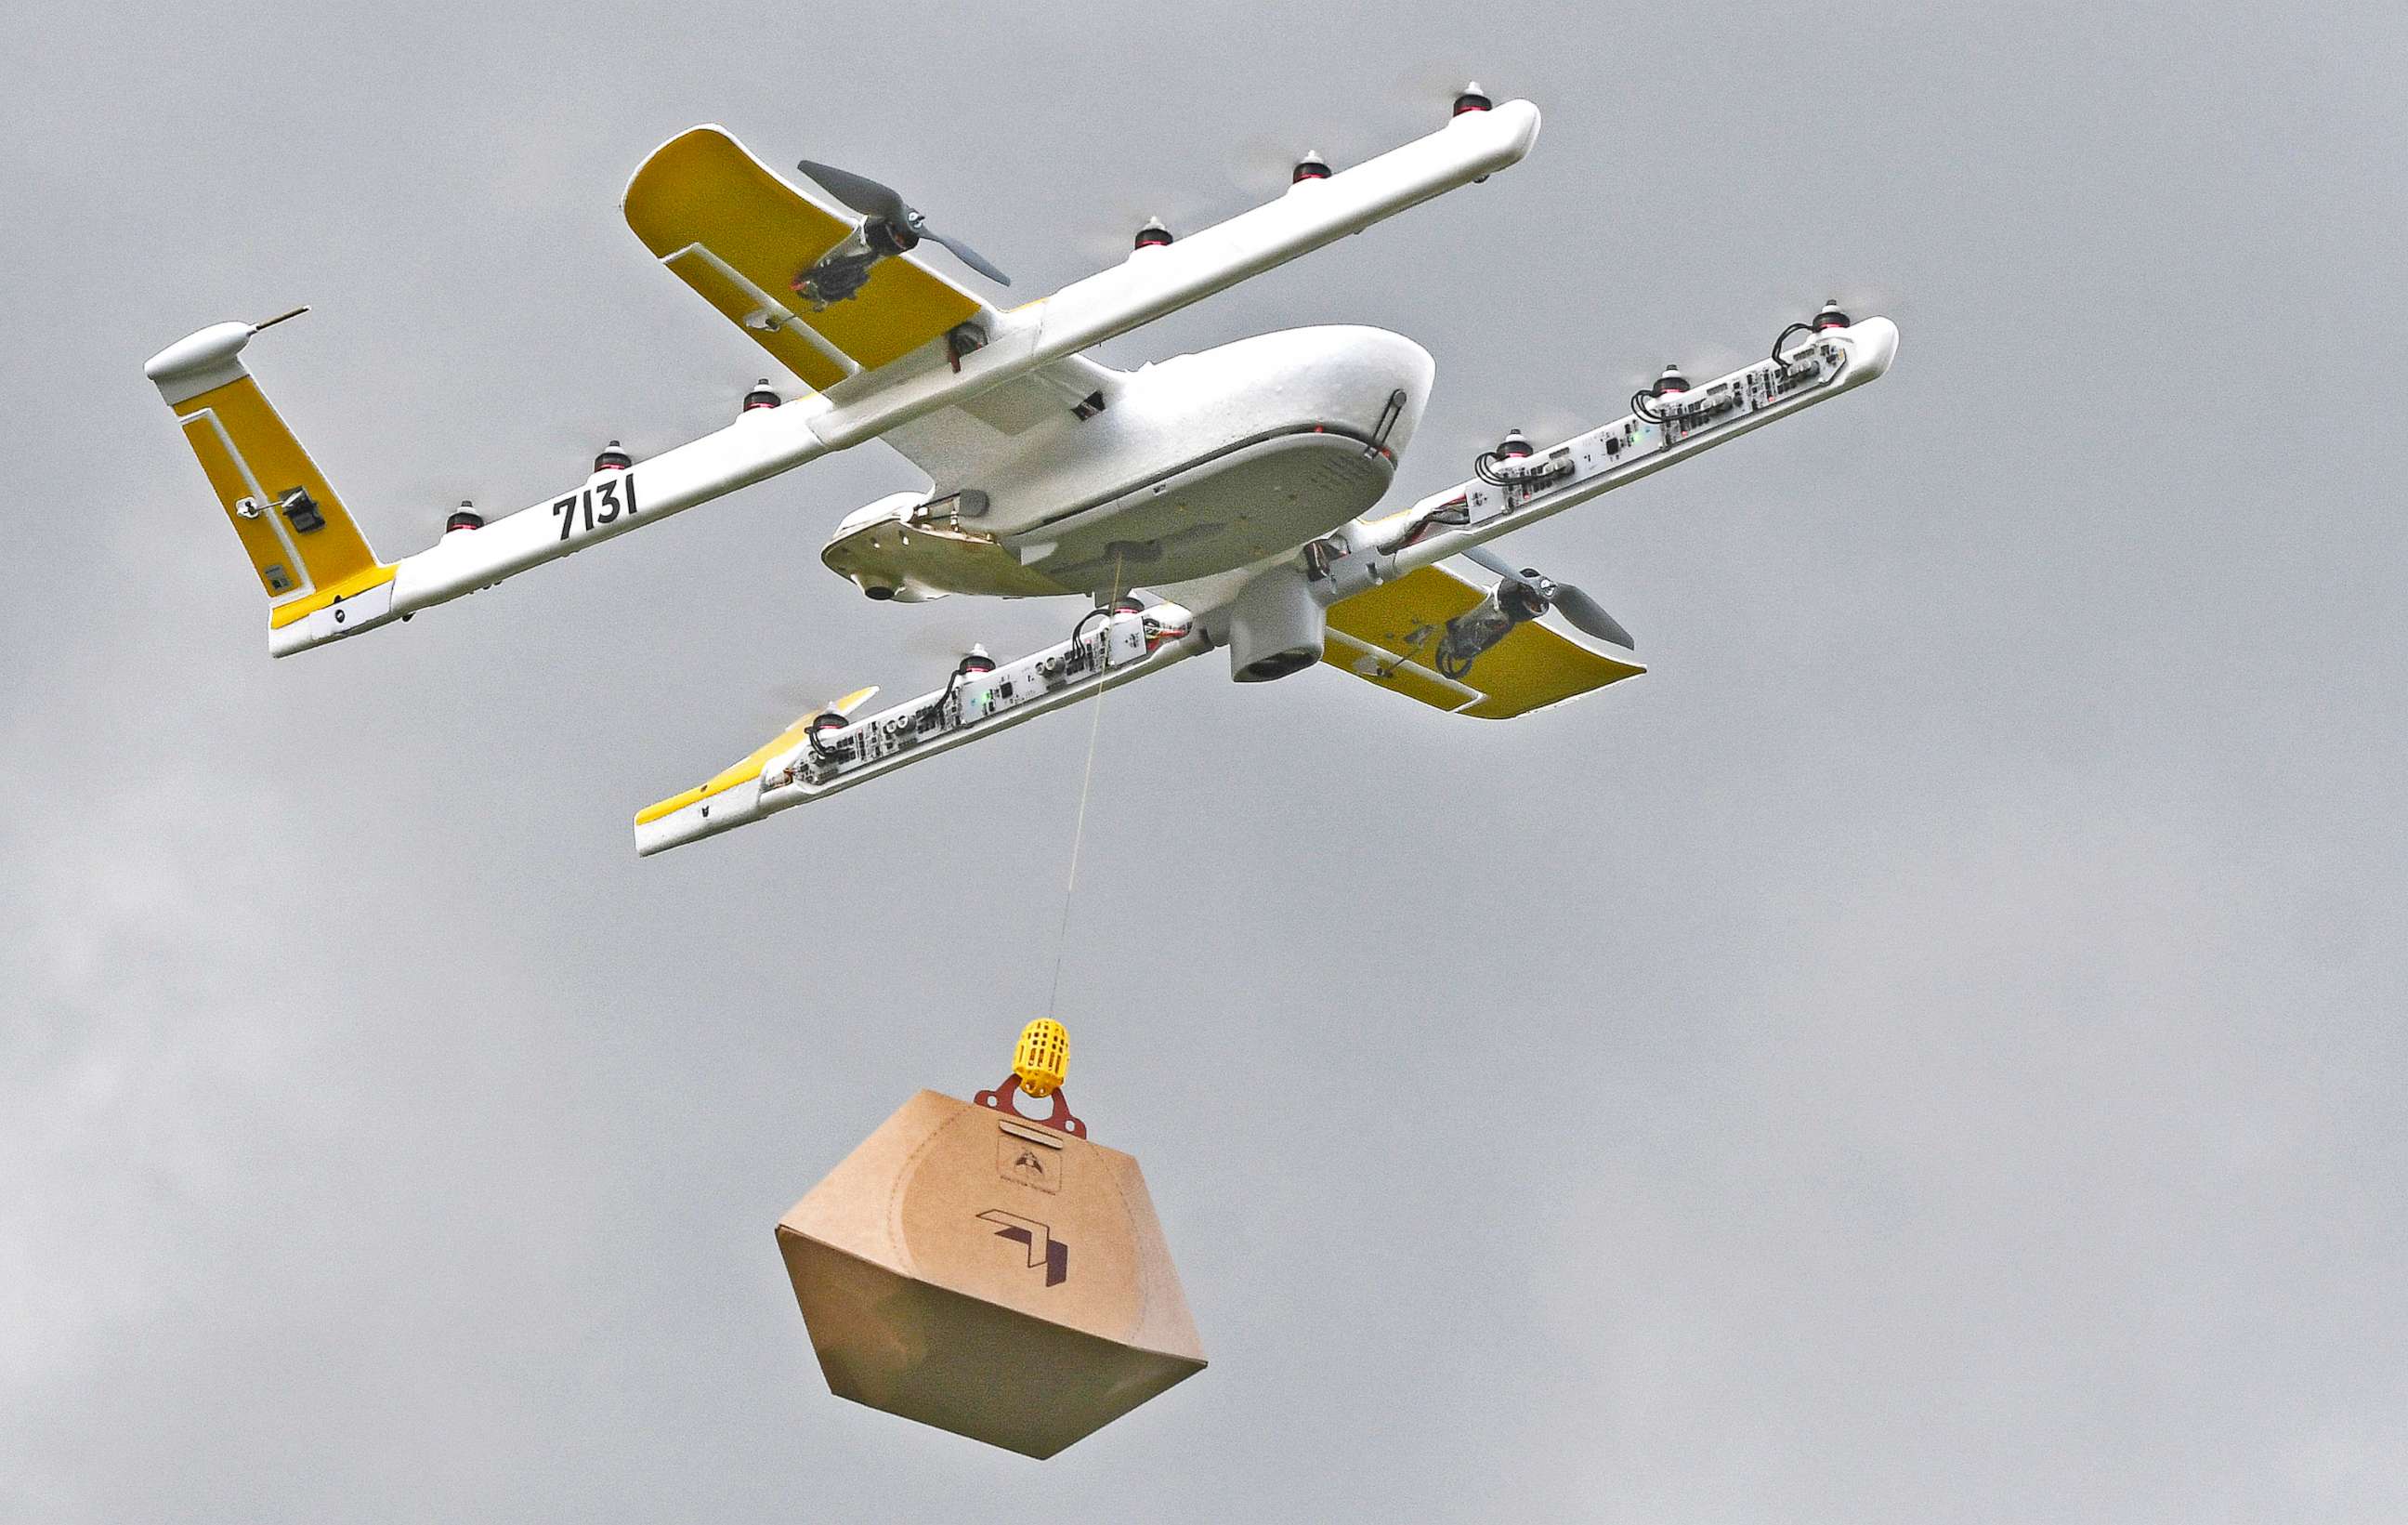 PHOTO: A Wing Hummingbird drone carries a package of ice cream and popsicles during a delivery flight demonstration in Blacksburg, Va., Aug, 7, 2018. Win is a subsidiary of Google's parent corporation Alphabet.